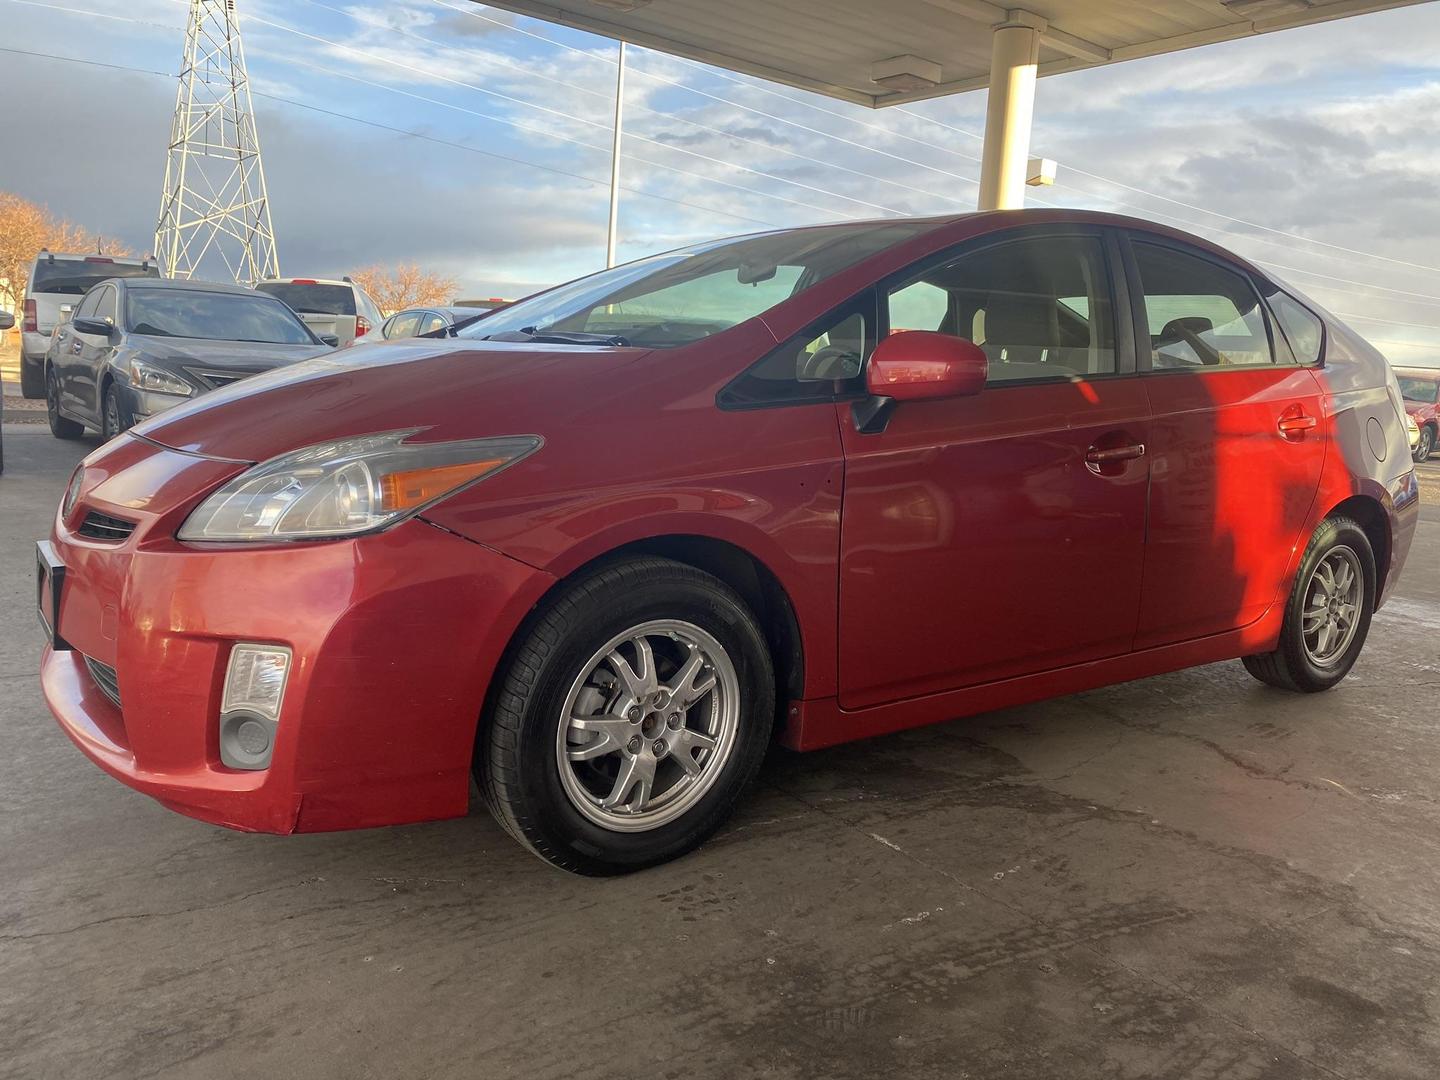 USED TOYOTA PRIUS 2010 for sale in Colorado Springs, CO